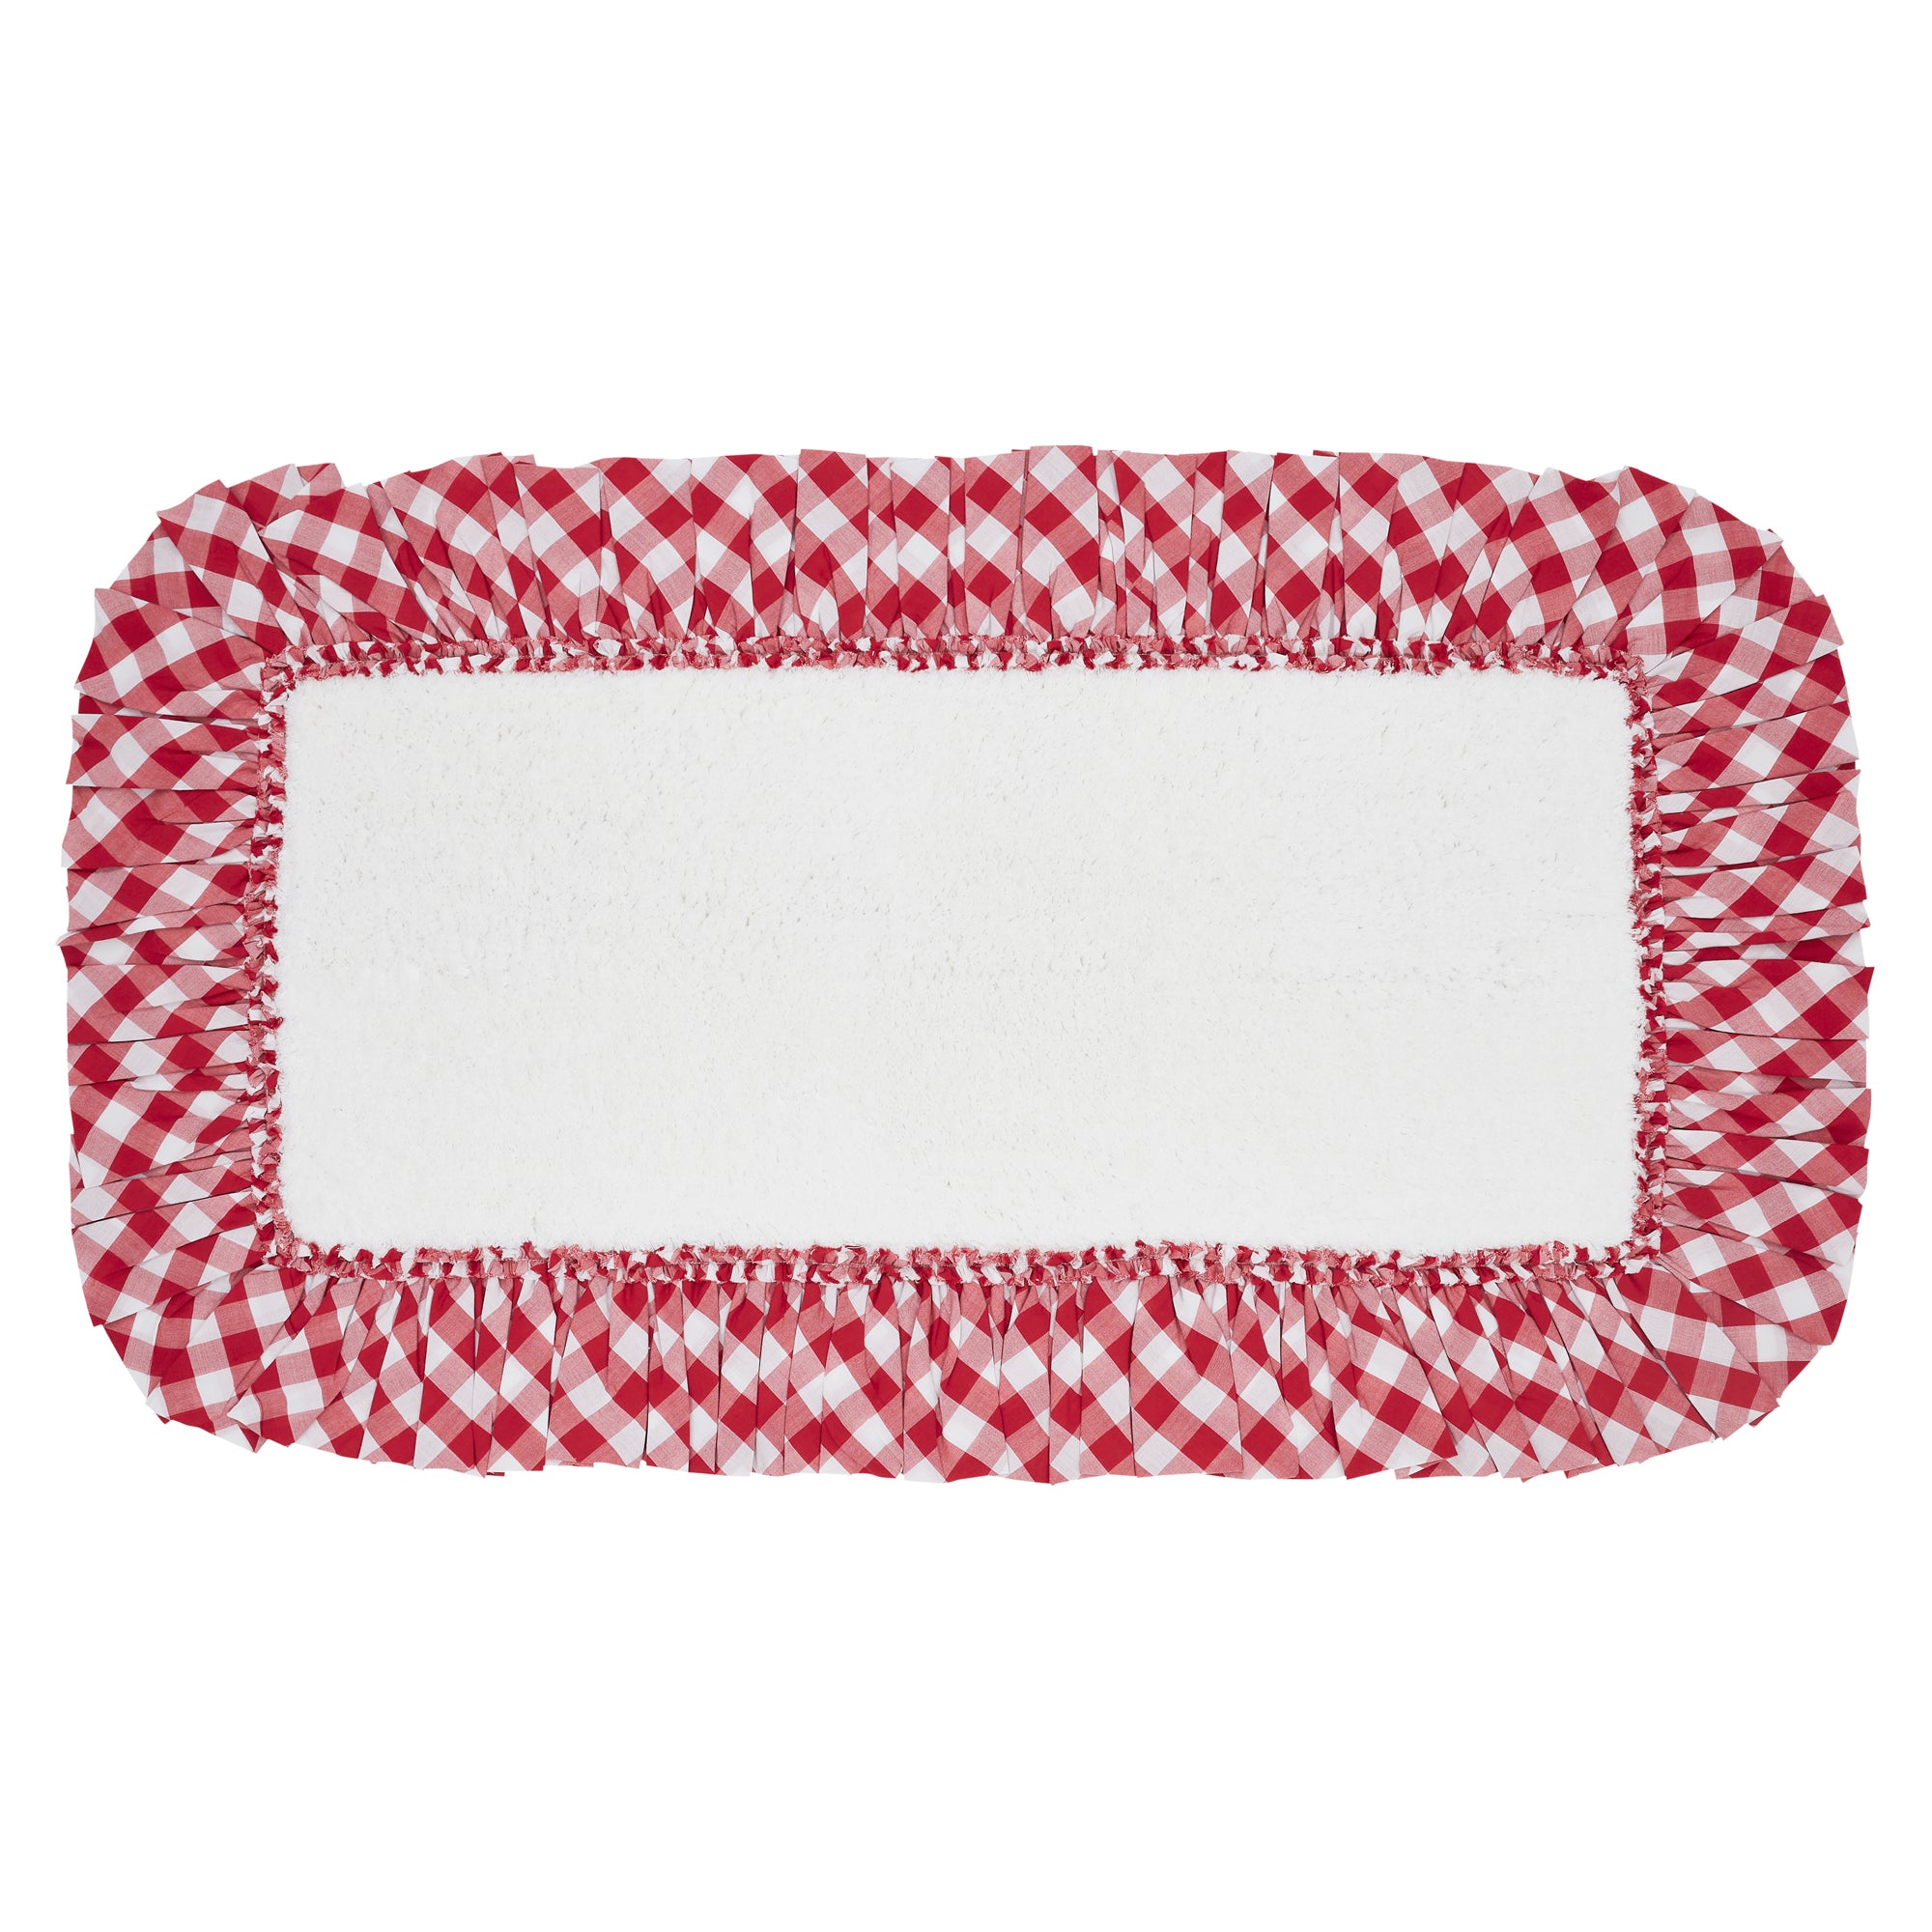 April & Olive Annie Buffalo Red Check Bathmat 27x48 By VHC Brands